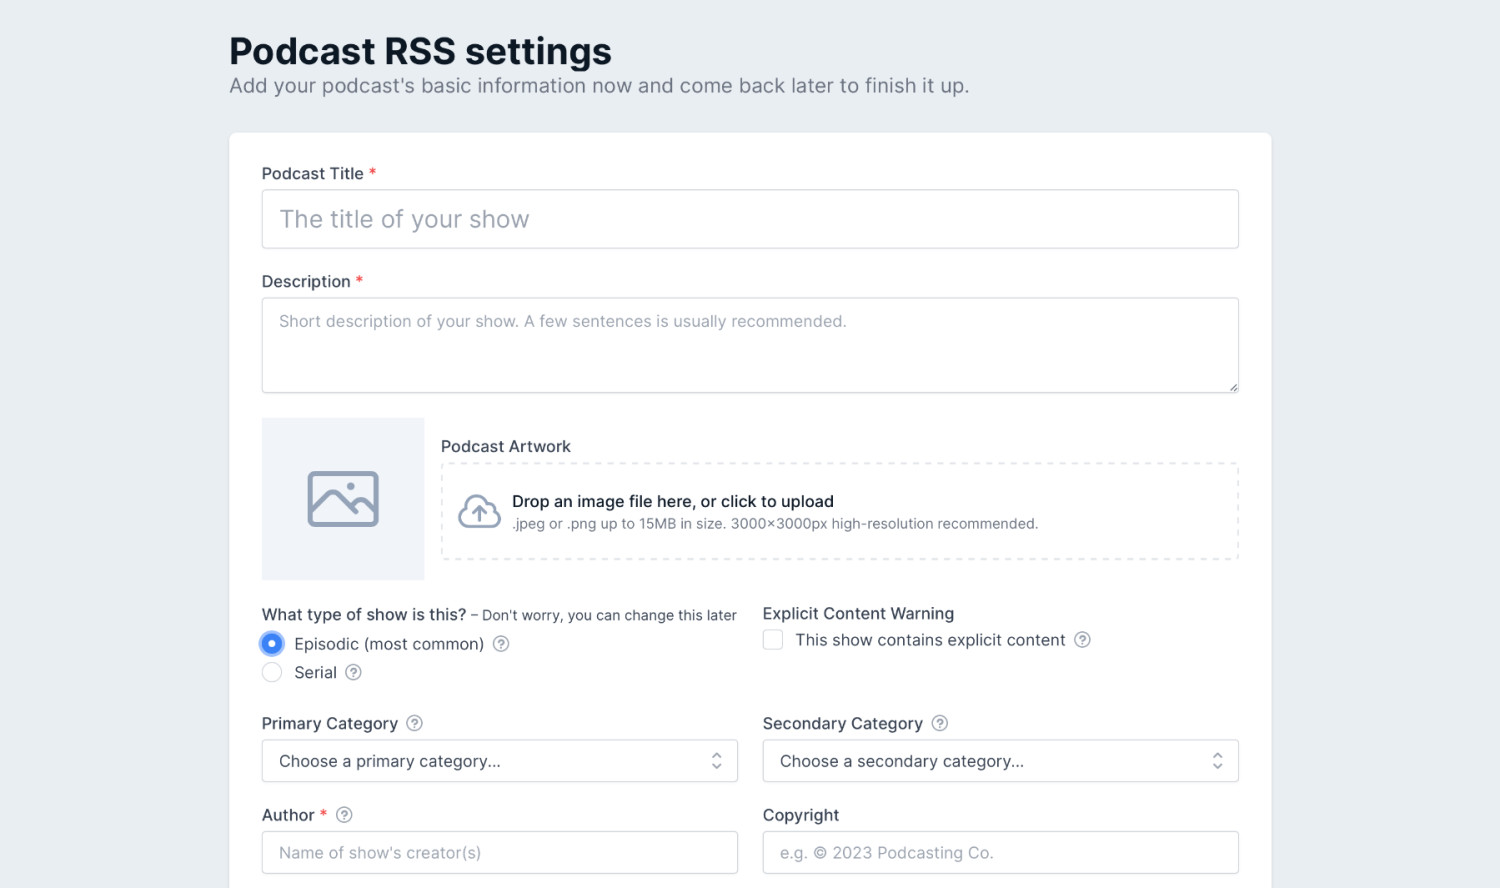 You'll need to define your show's settings which will be reflected in your RSS feed.